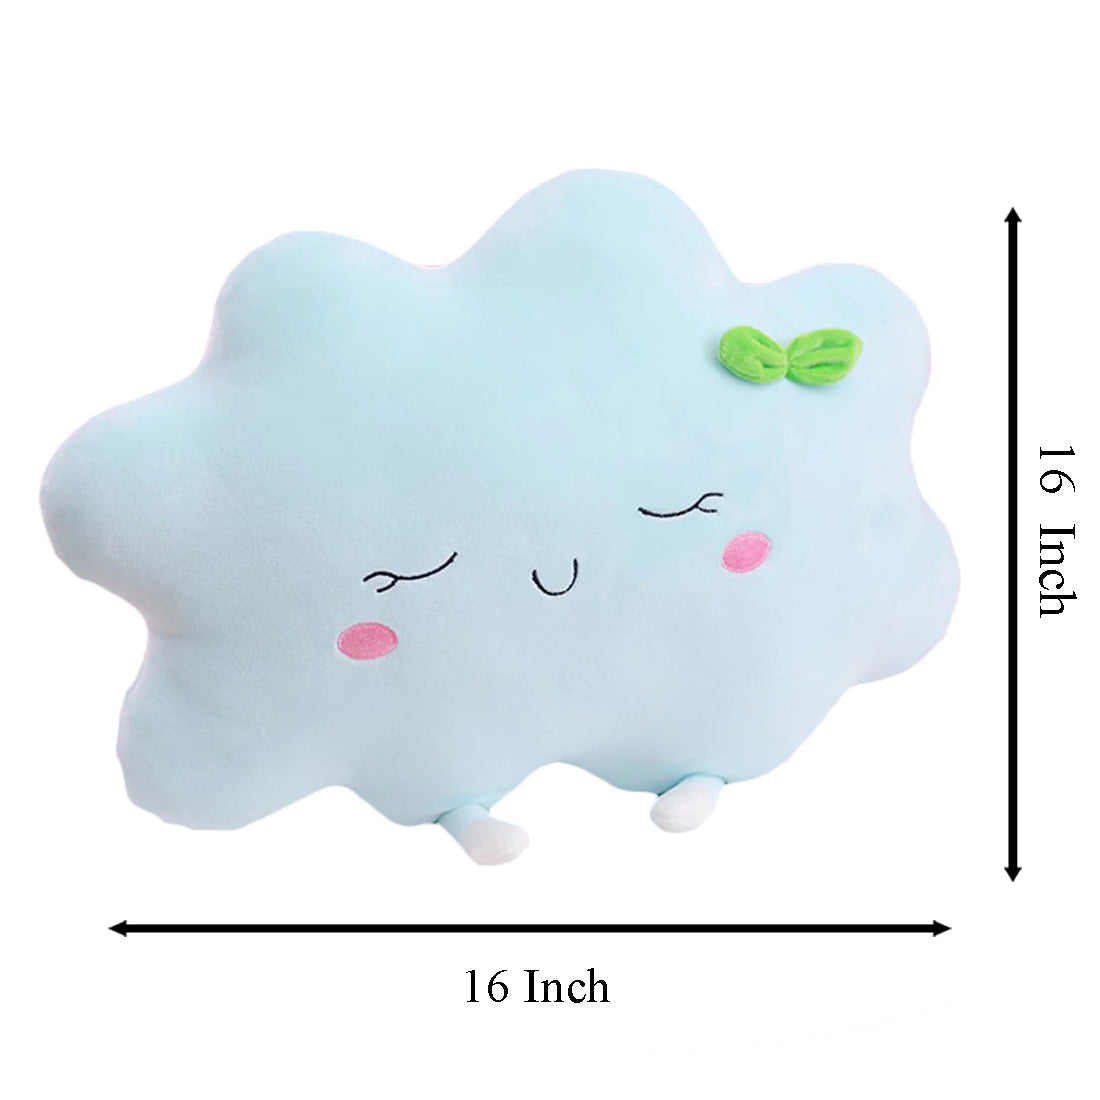 4. Blue cloud-shaped pillow displayed on a table, a delightful decorative item for your home.